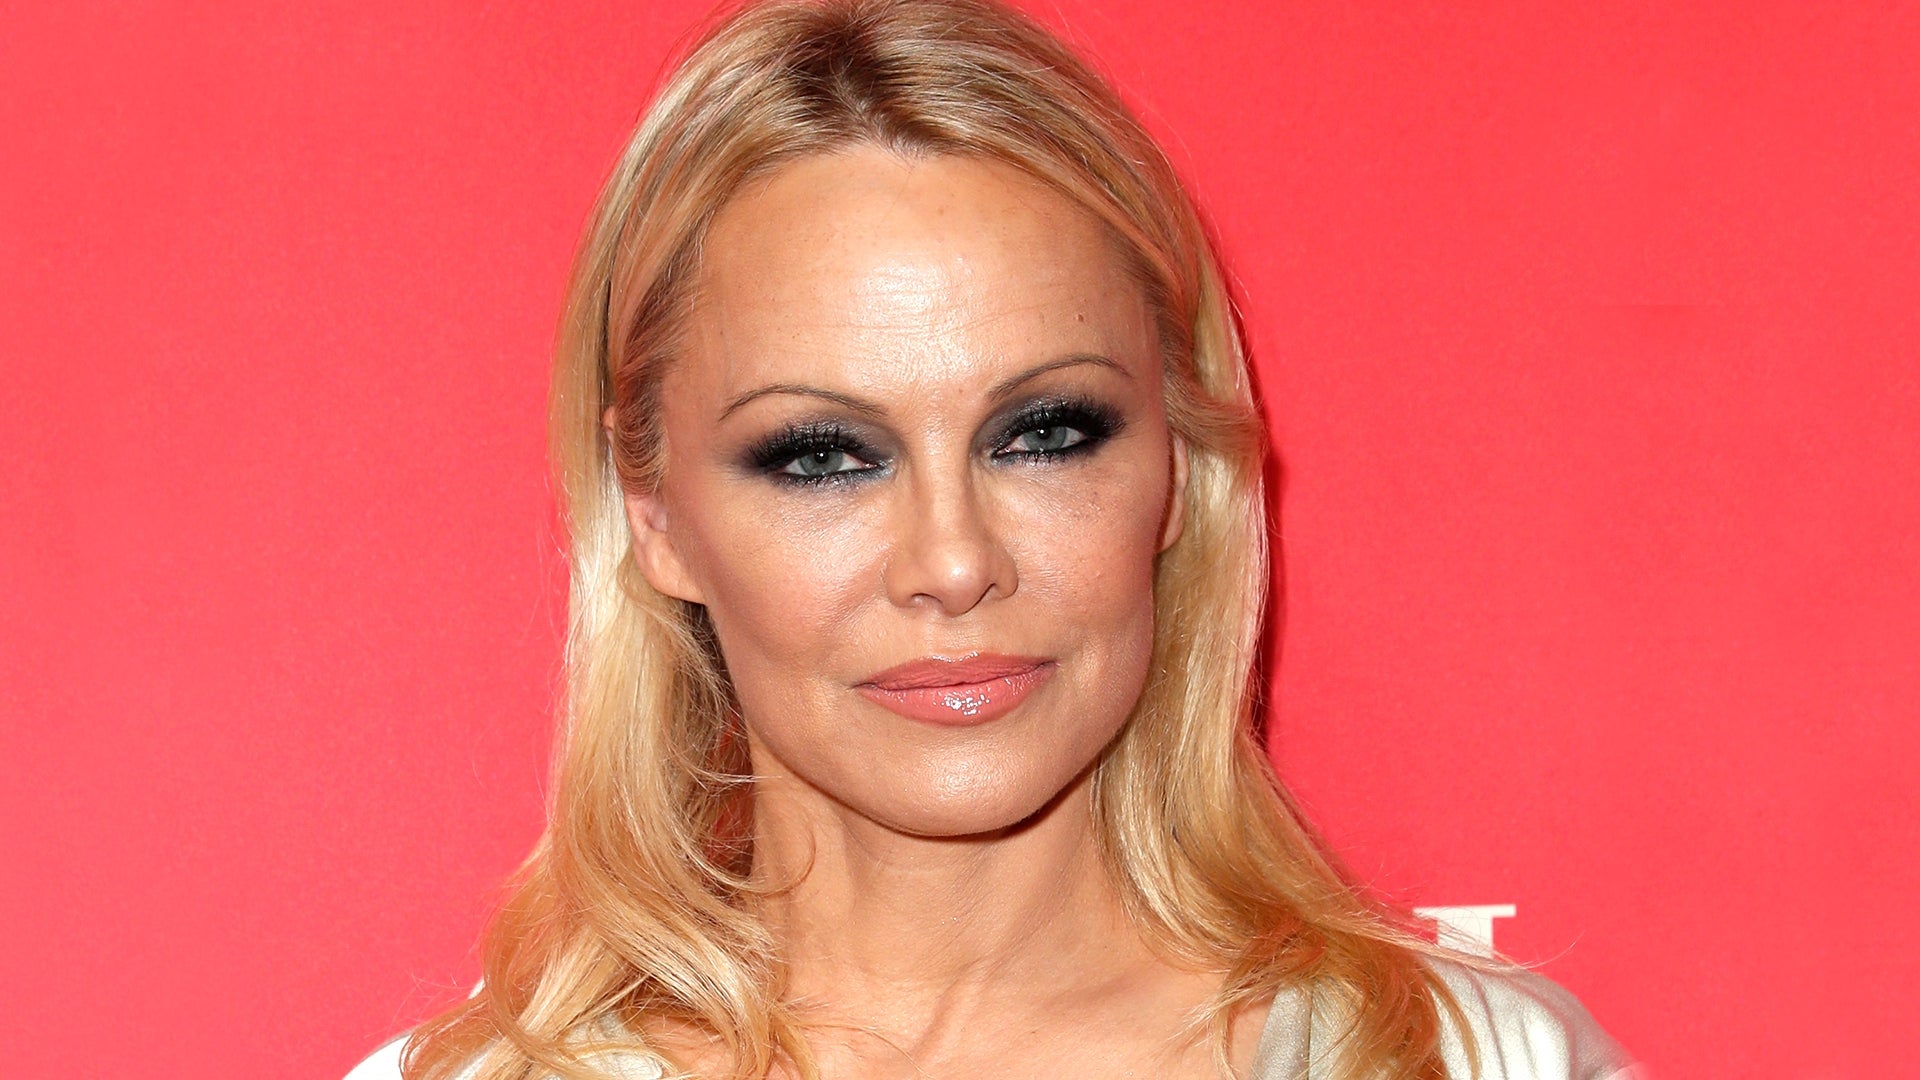 Pamela Anderson A Timeline of Her Explosive Romance With Tommy Lee Entertainment Tonight image